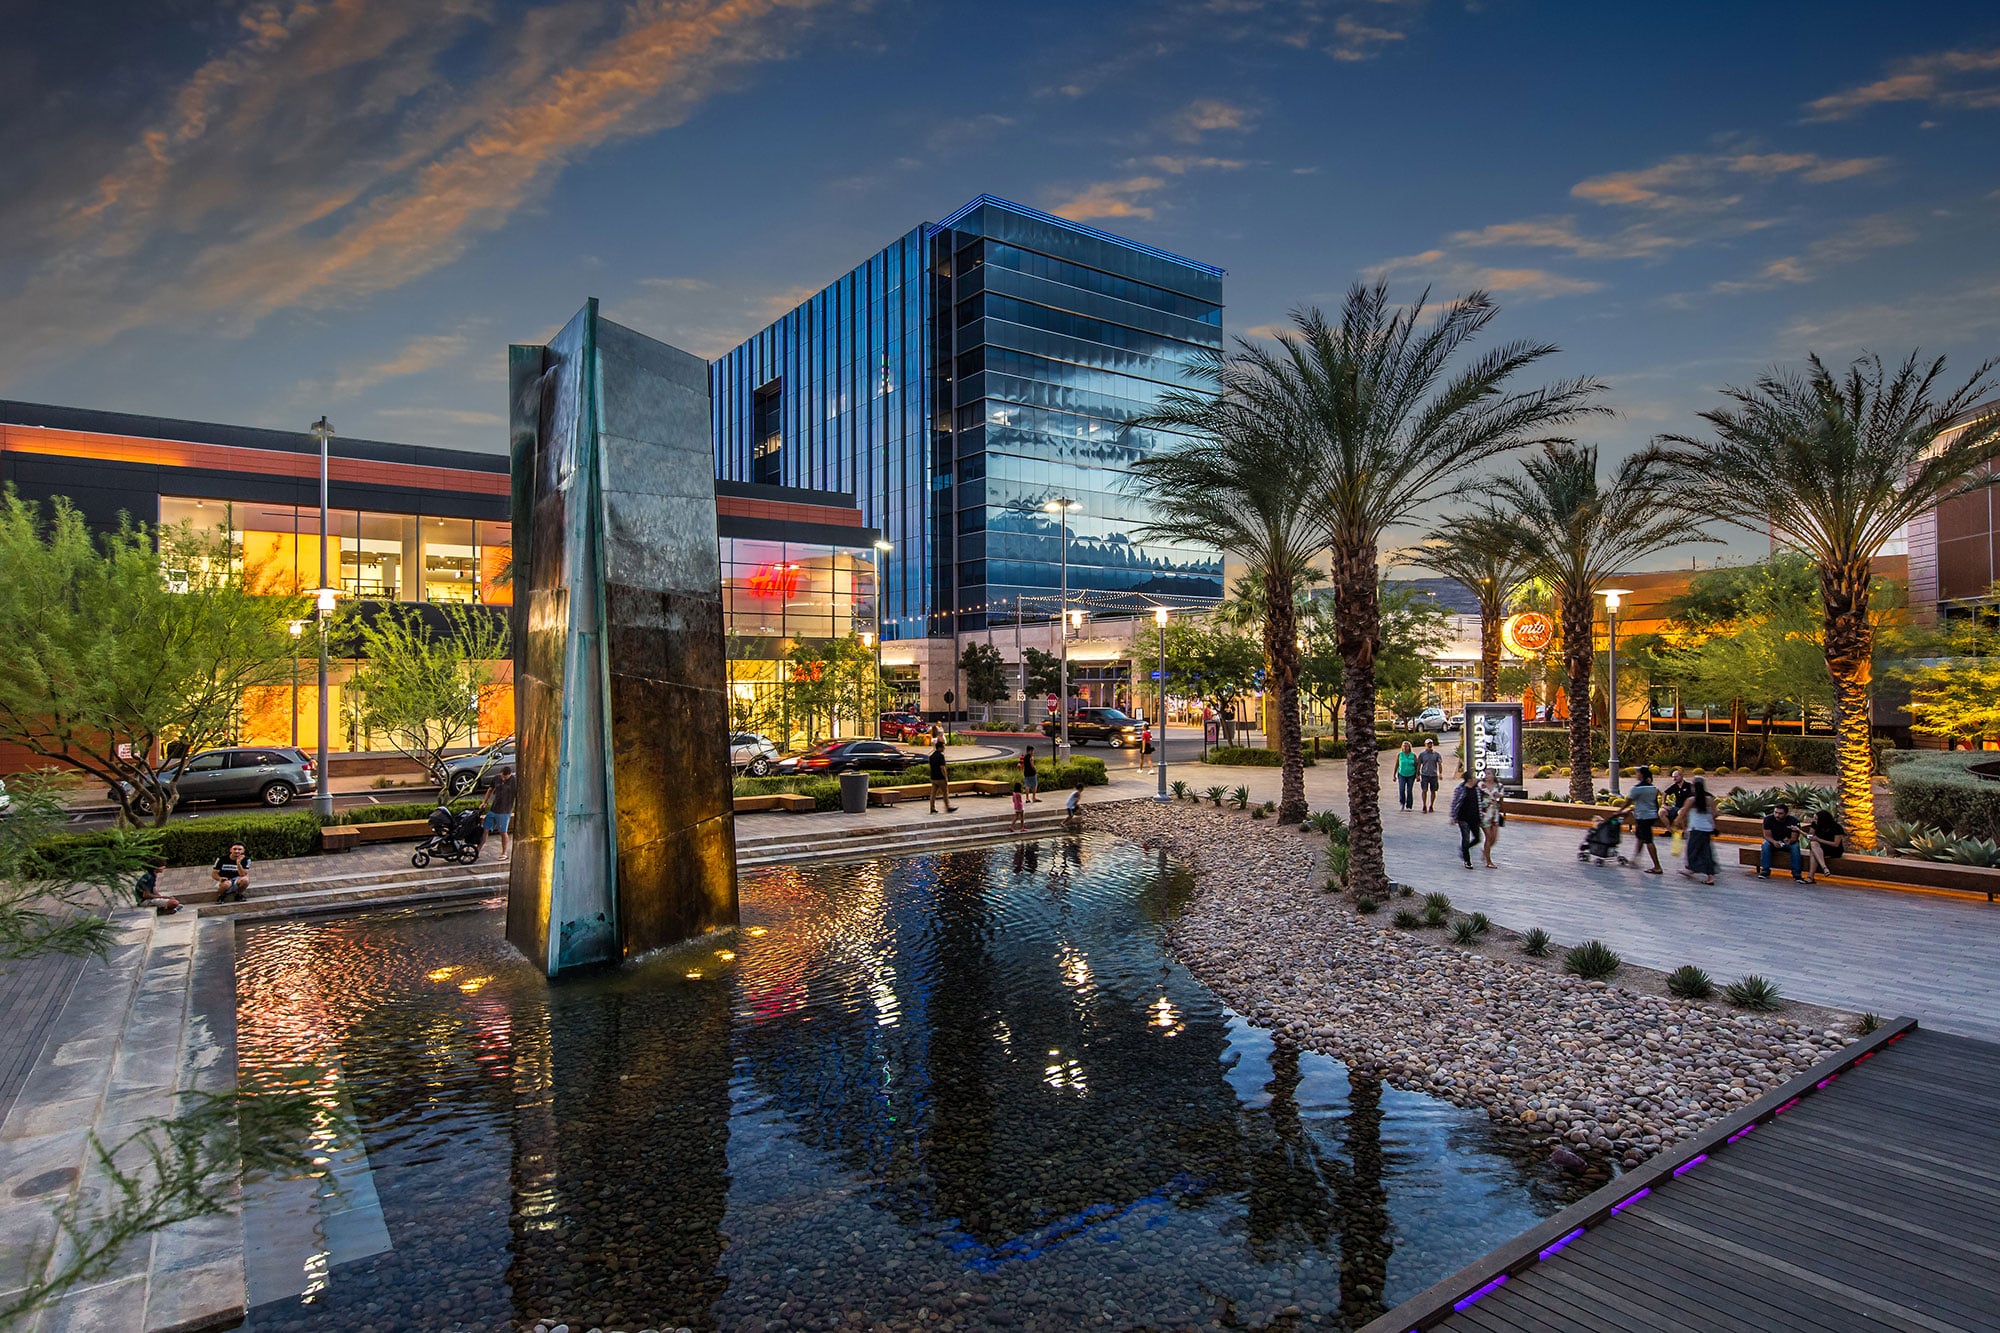 Dining Arroyo at sunset in Downtown Summerlin